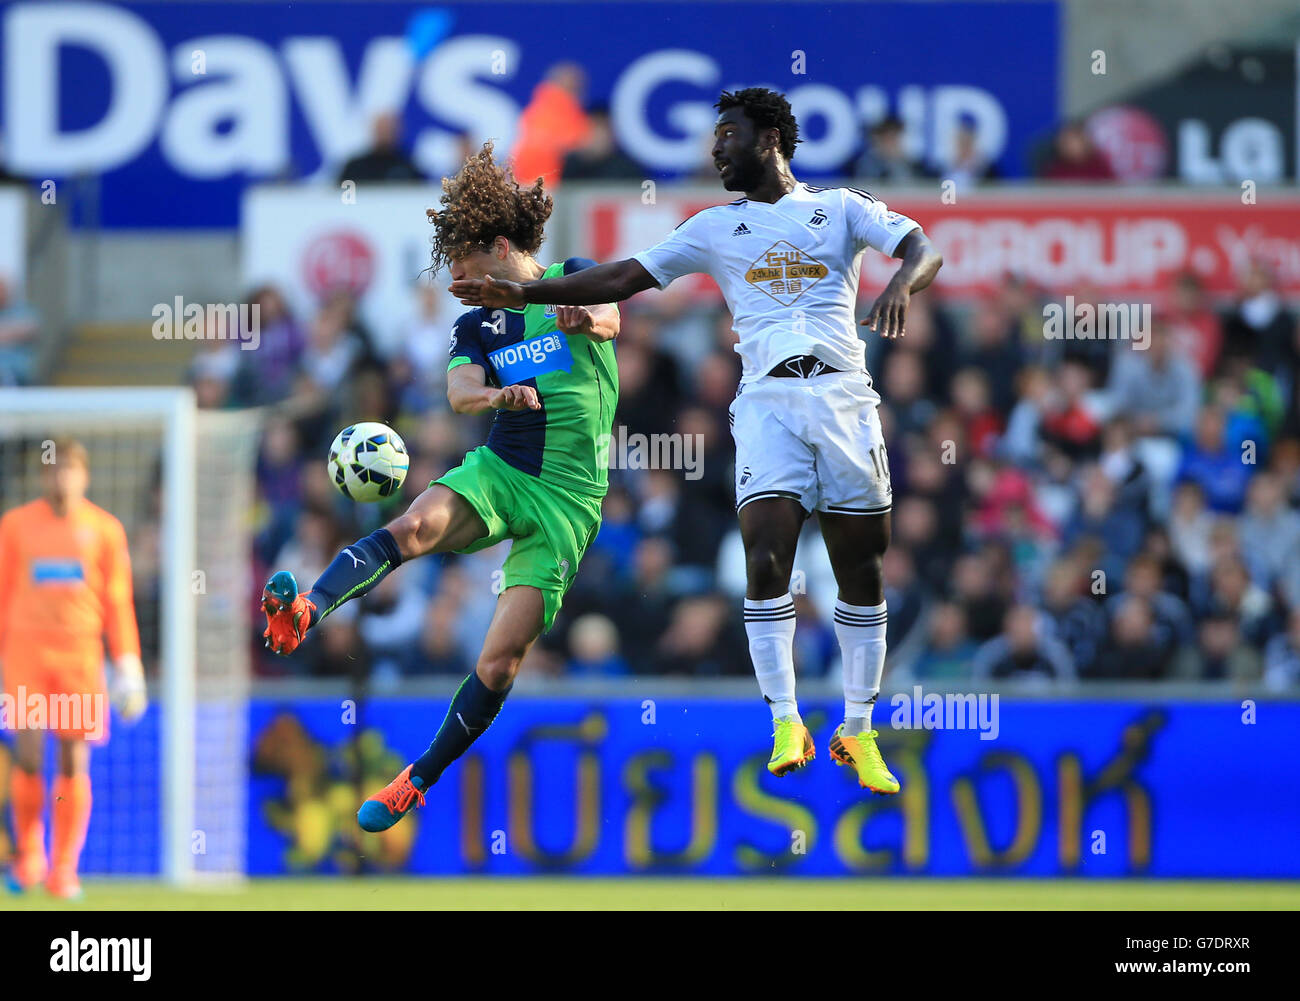 Newcastle United's Fabricio Coloccini (left) battles for the ball with Swansea City's Wilfried Bony during the Barclays Premier League match at the Liberty Stadium, Swansea. Stock Photo